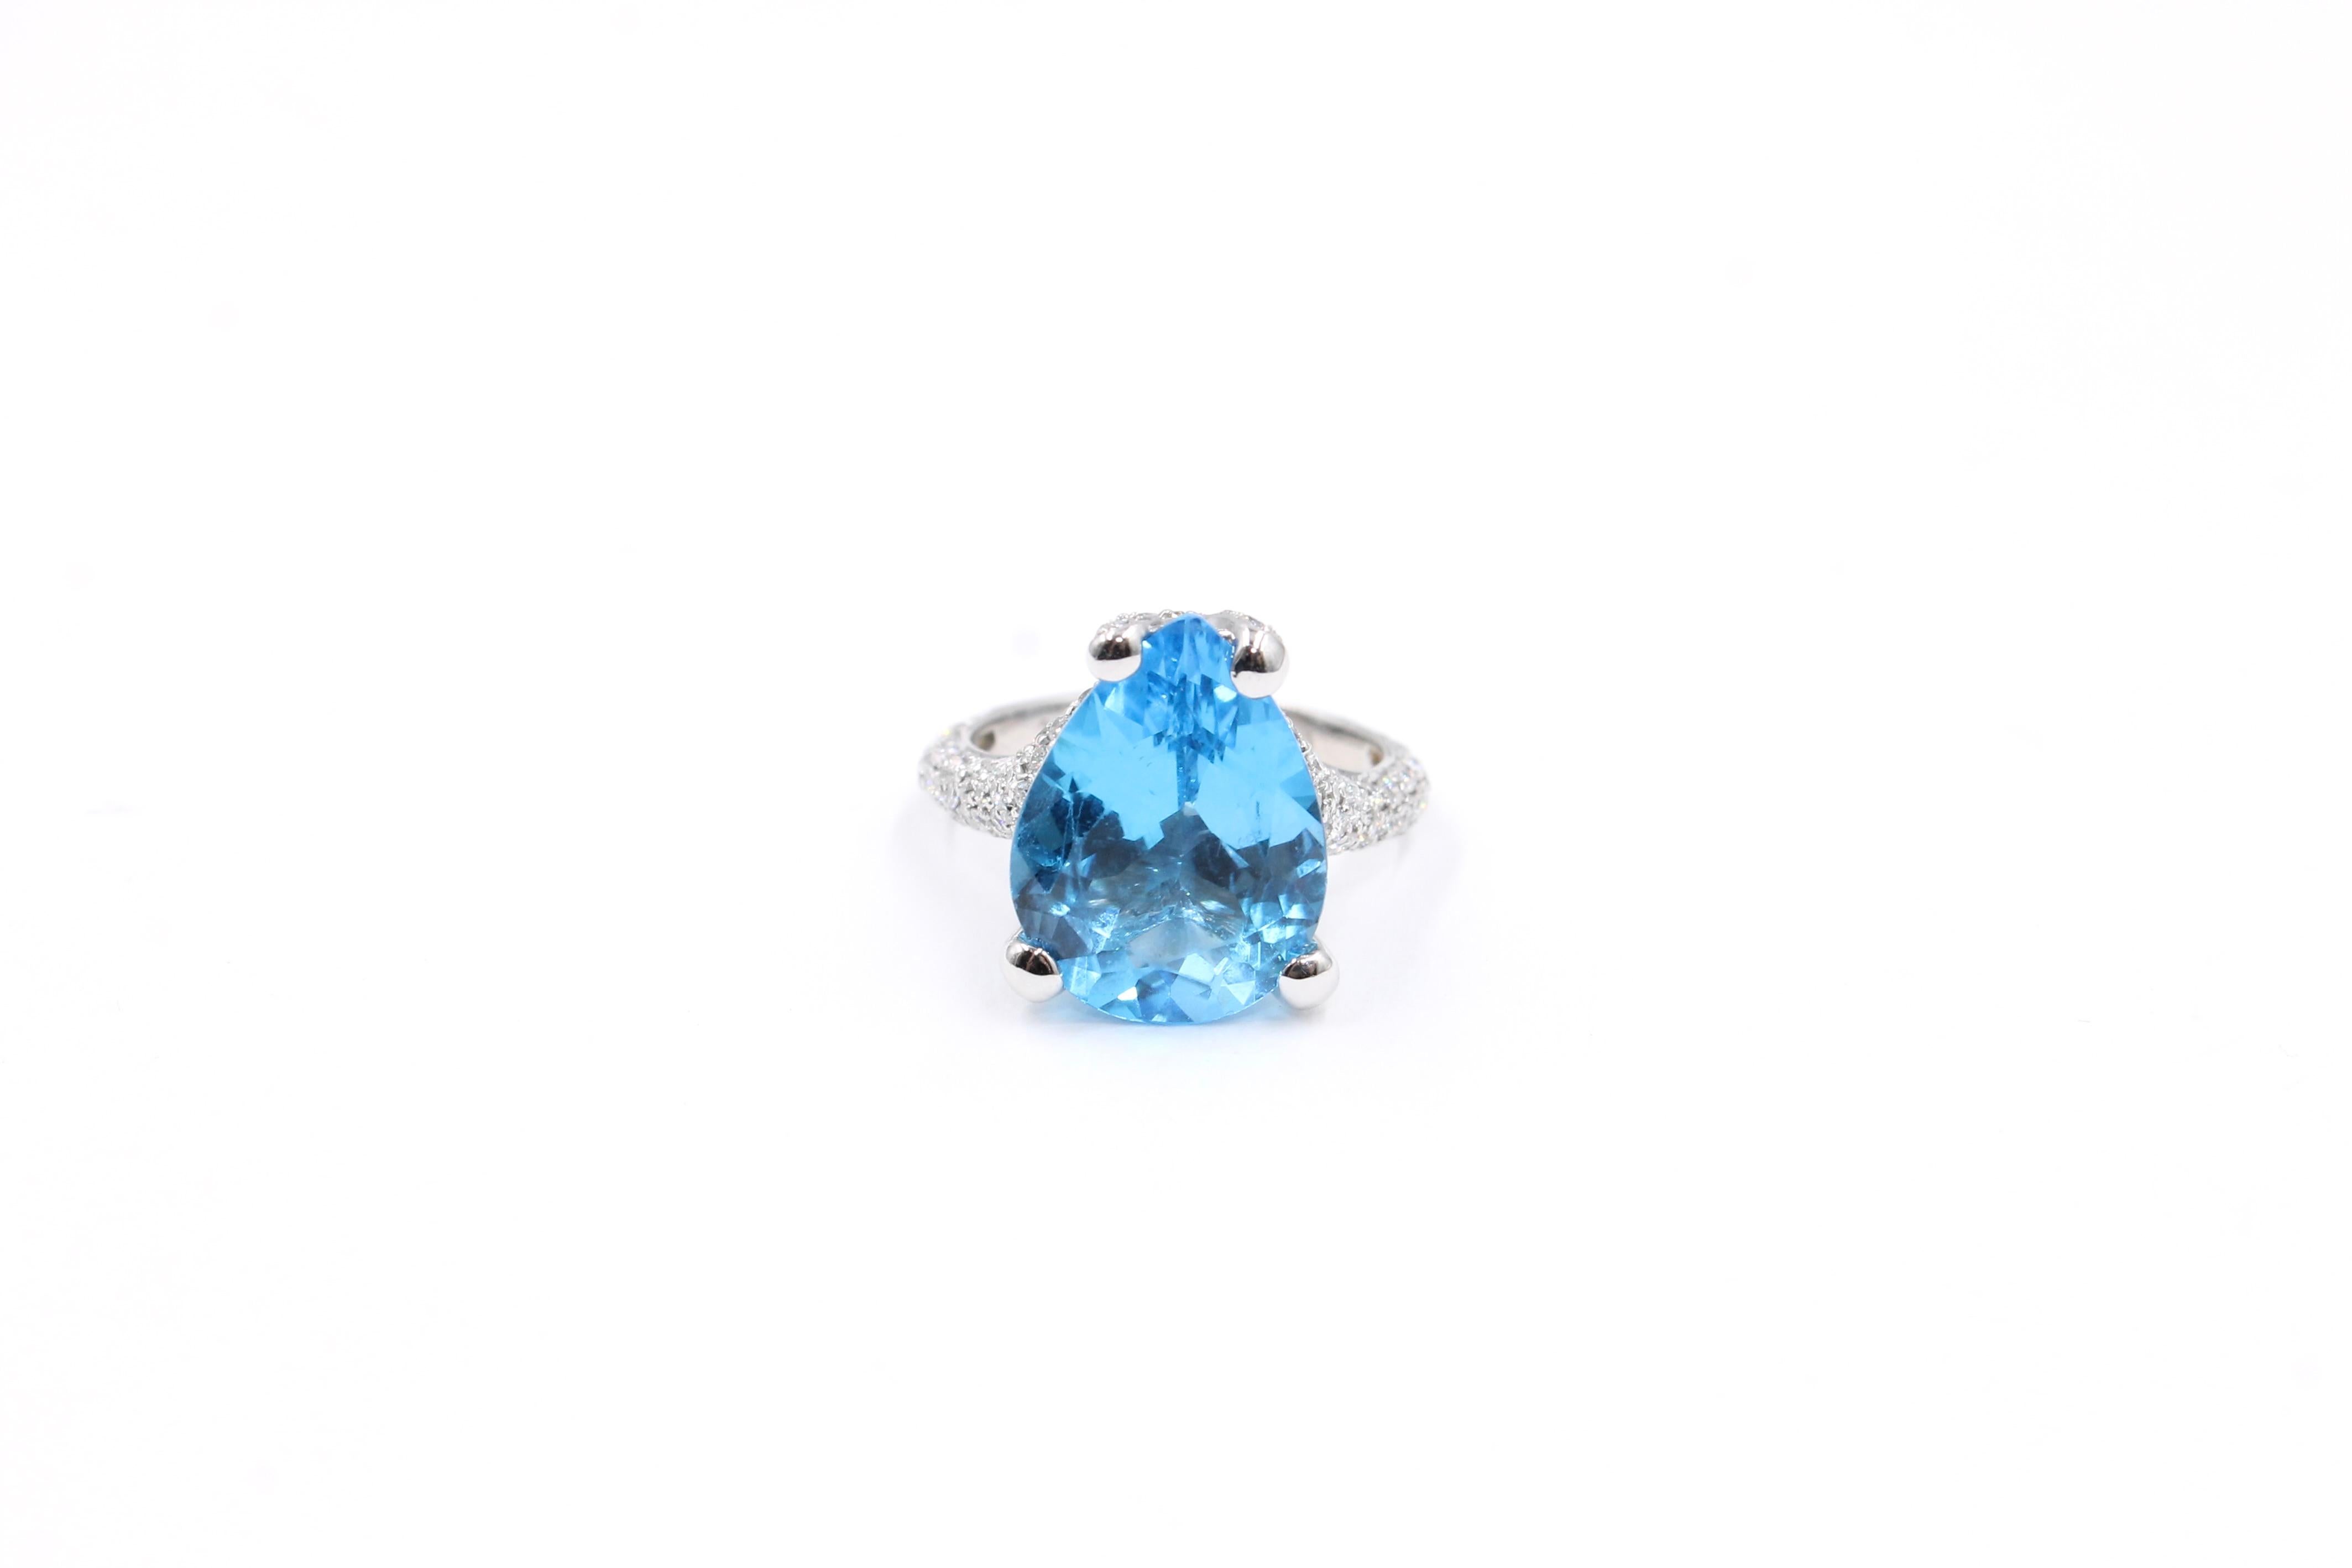 Vintage ring set with an oval shape blue topaze of approximately estimated 8.00 Carats and approximately 0.90 Carats of full cut diamonds (estimated H color - Vs clarity). 

The stones are bright and lively. The topaze has a really nice clear ocean